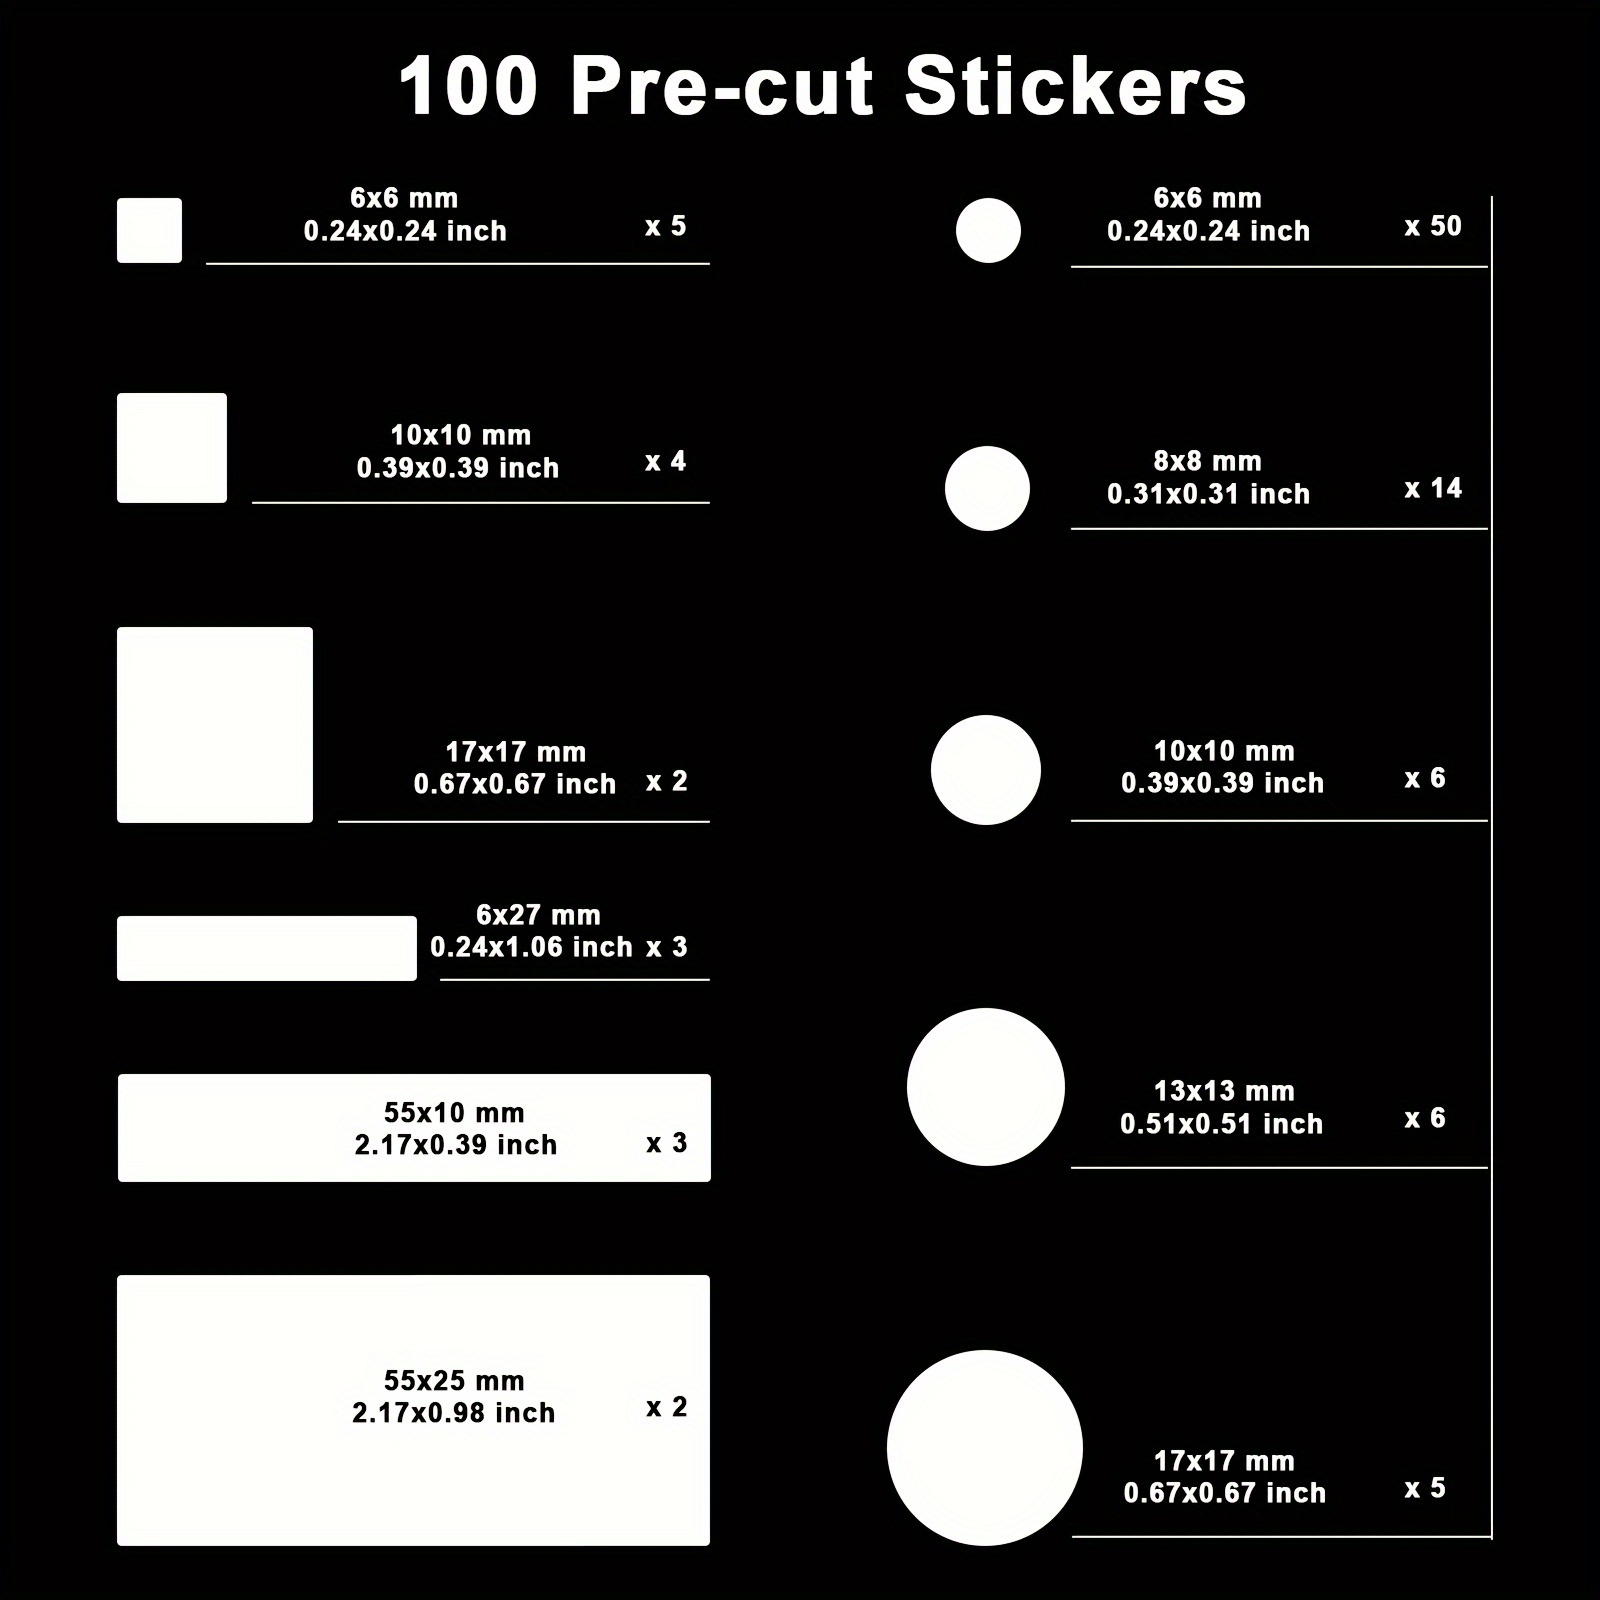 LED Light Blocking Stickers, mmcrz LED Light Blackout Sticker Light Dimming  Stickers, LED Filters Dimming Sheets for Routers, TV LED Covers Blackout